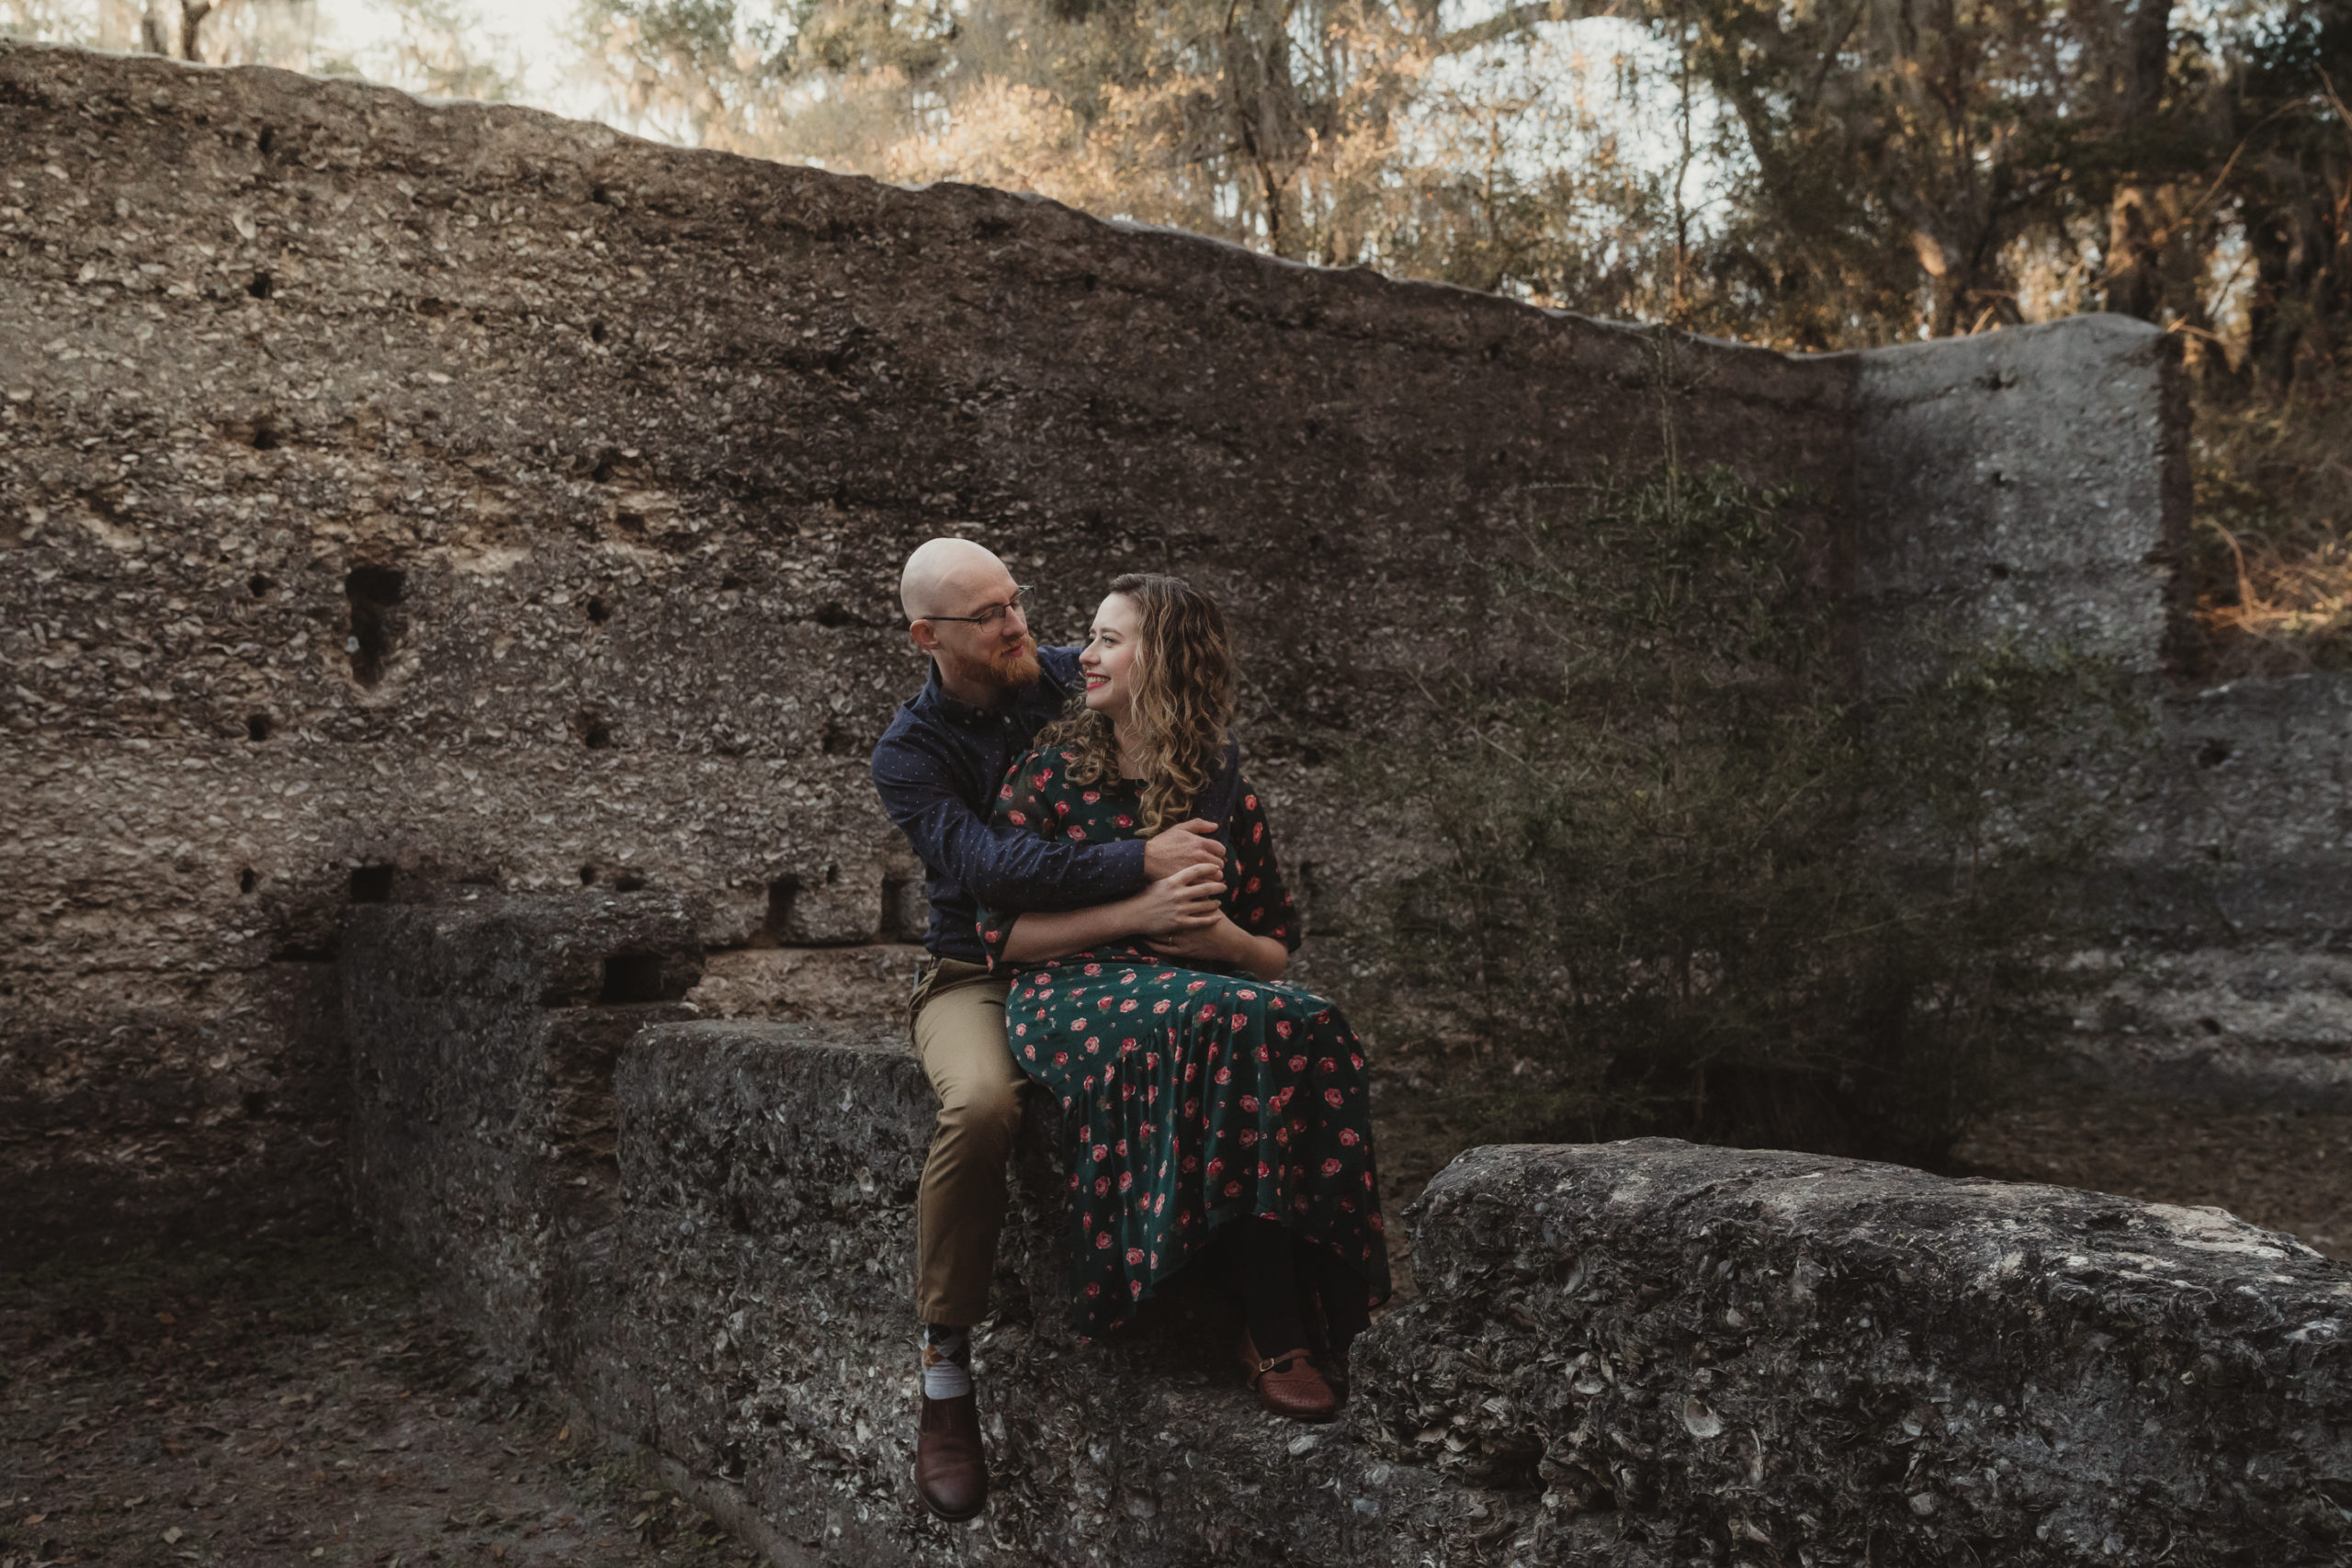 southeast georgia wedding photographer sneak peek for engagement session at Tabby ruins in st marys